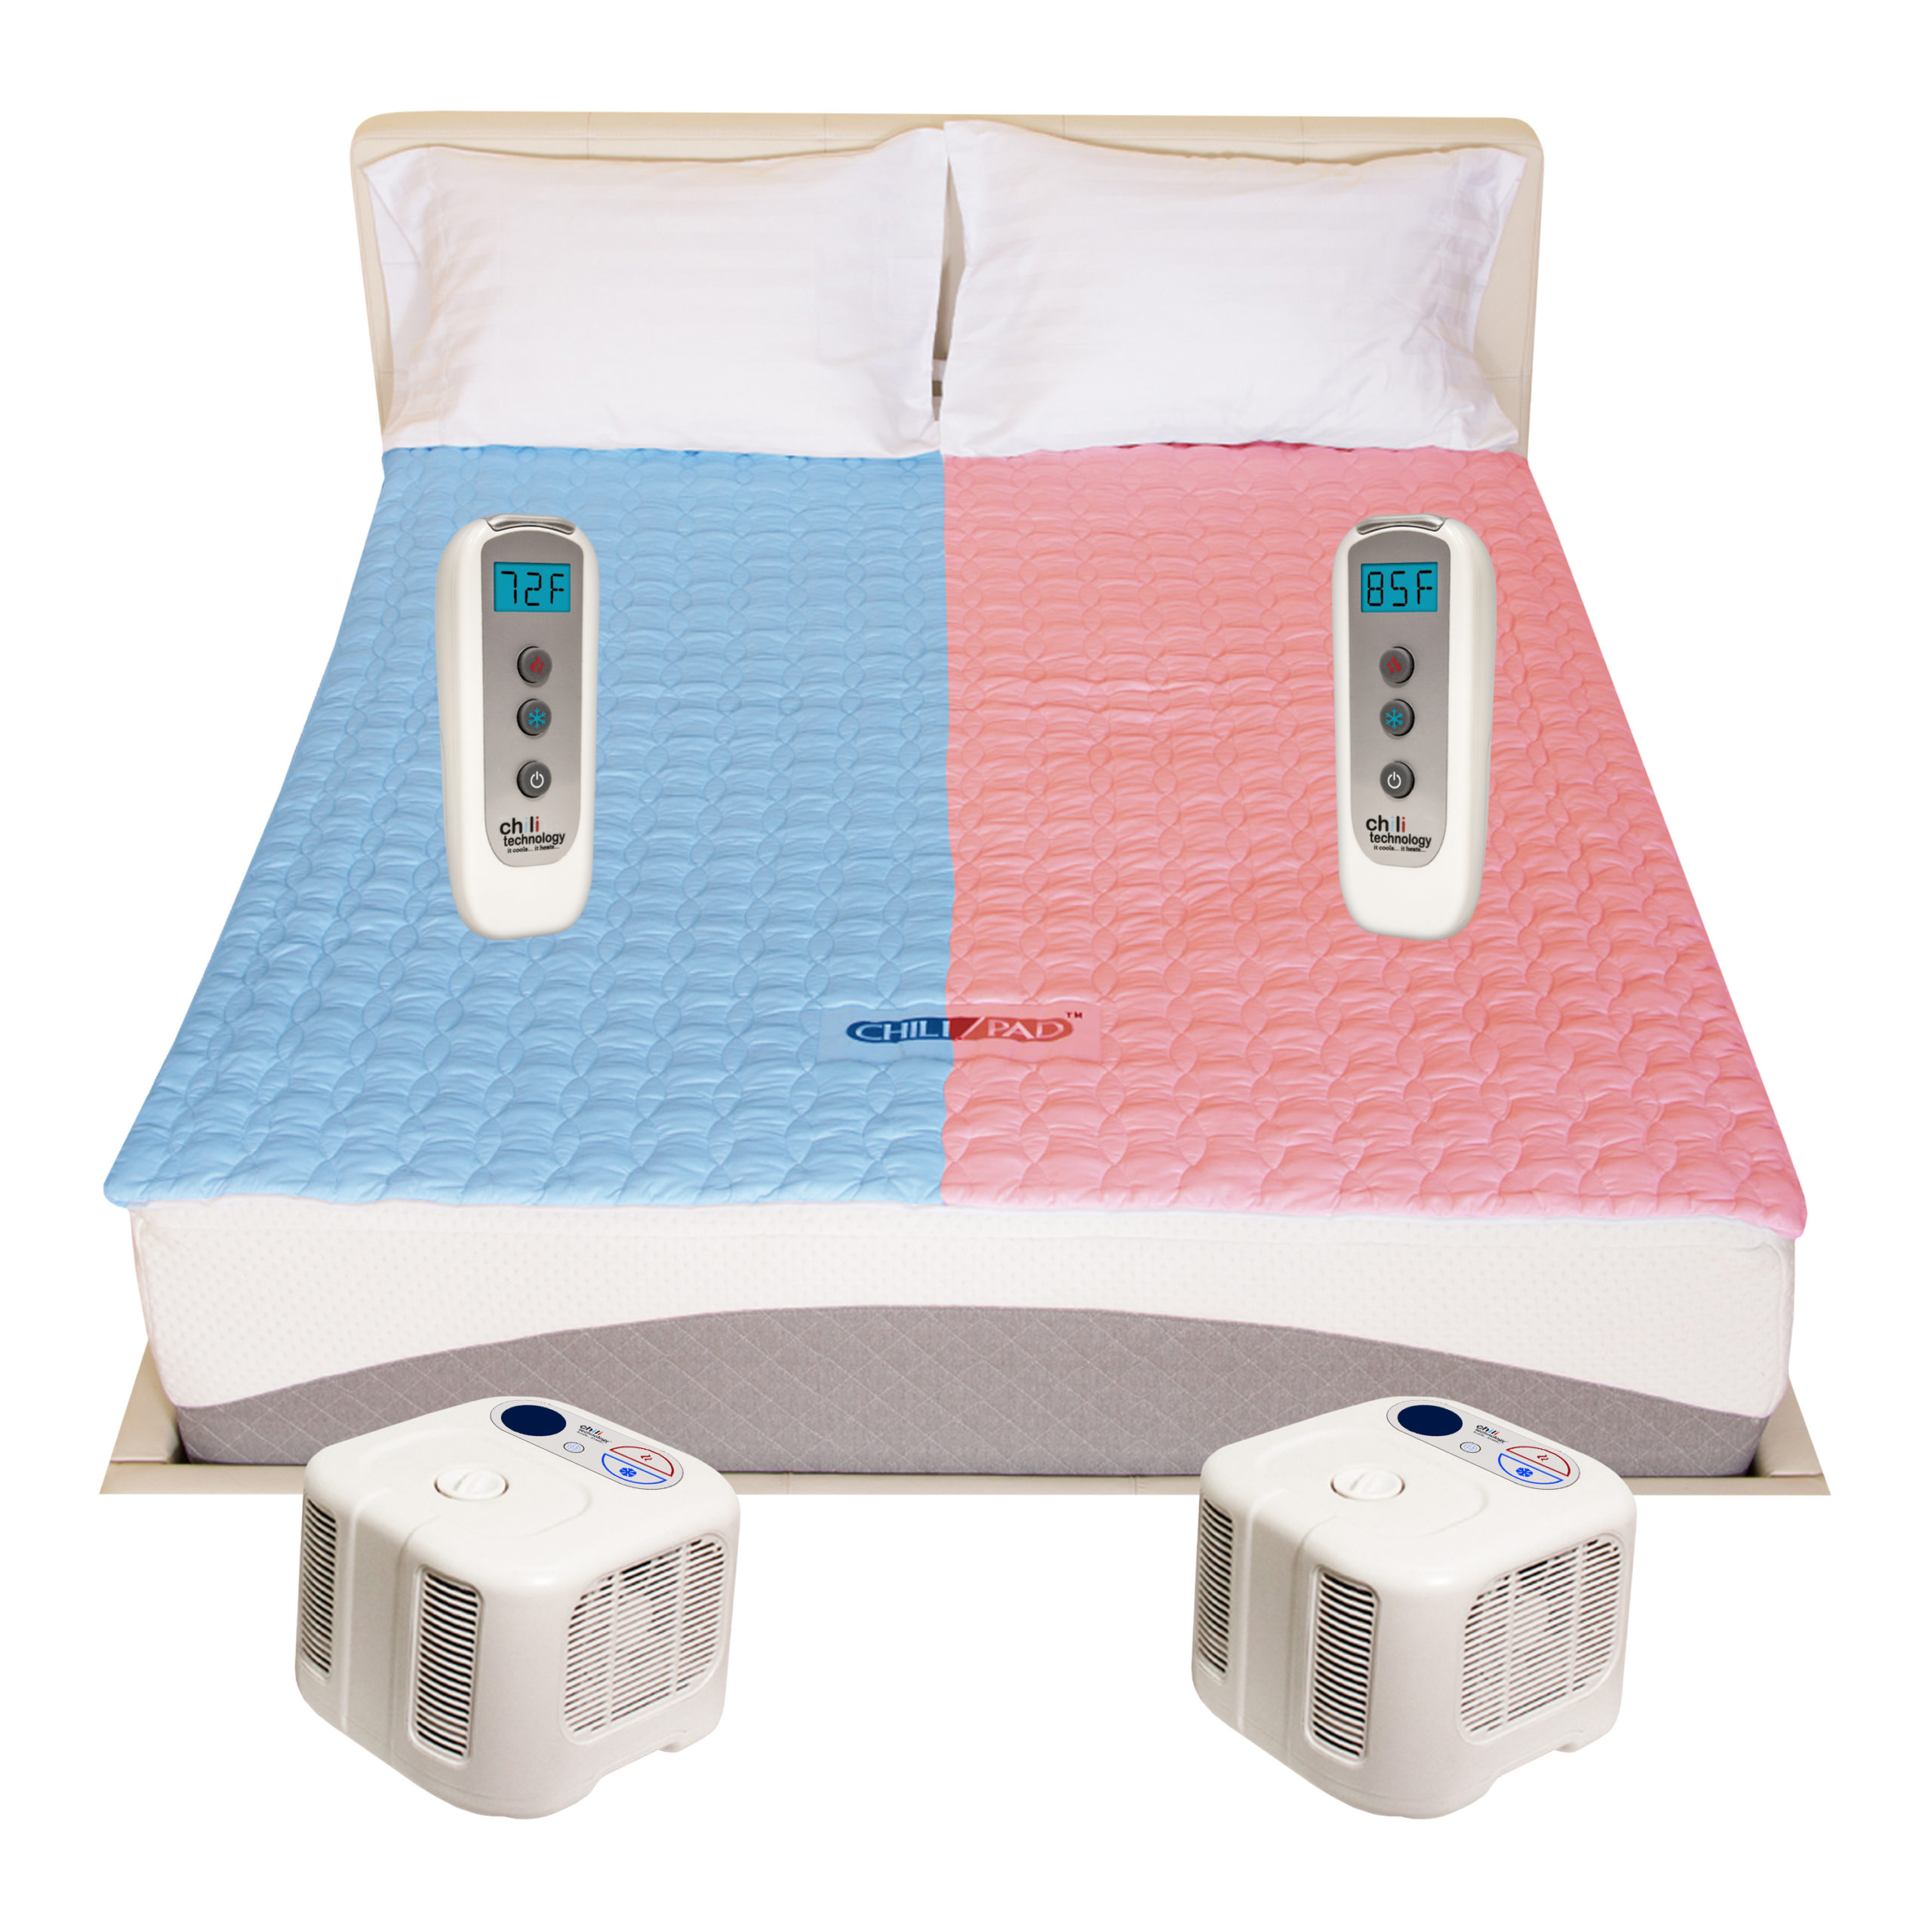 Deep Sleep® Mini - Chilipad|Temperature|Mattress|Cube|Sleep|Bed|Water|System|Pad|Ooler|Control|Unit|Night|Bedjet|Technology|Side|Air|Product|Review|Body|Time|Degrees|Noise|Price|Pod|Tubes|Heat|Device|Cooling|Room|King|App|Features|Size|Cover|Sleepers|Sheets|Energy|Warranty|Quality|Mattress Pad|Control Unit|Cube Sleep System|Sleep Pod|Distilled Water|Remote Control|Sleep System|Desired Temperature|Water Tank|Chilipad Cube|Chili Technology|Deep Sleep|Pro Cover|Ooler Sleep System|Hydrogen Peroxide|Cool Mesh|Sleep Temperature|Fitted Sheet|Pod Pro|Sleep Quality|Smartphone App|Sleep Systems|Chilipad Sleep System|New Mattress|Sleep Trial|Full Refund|Mattress Topper|Body Heat|Air Flow|Chilipad Review